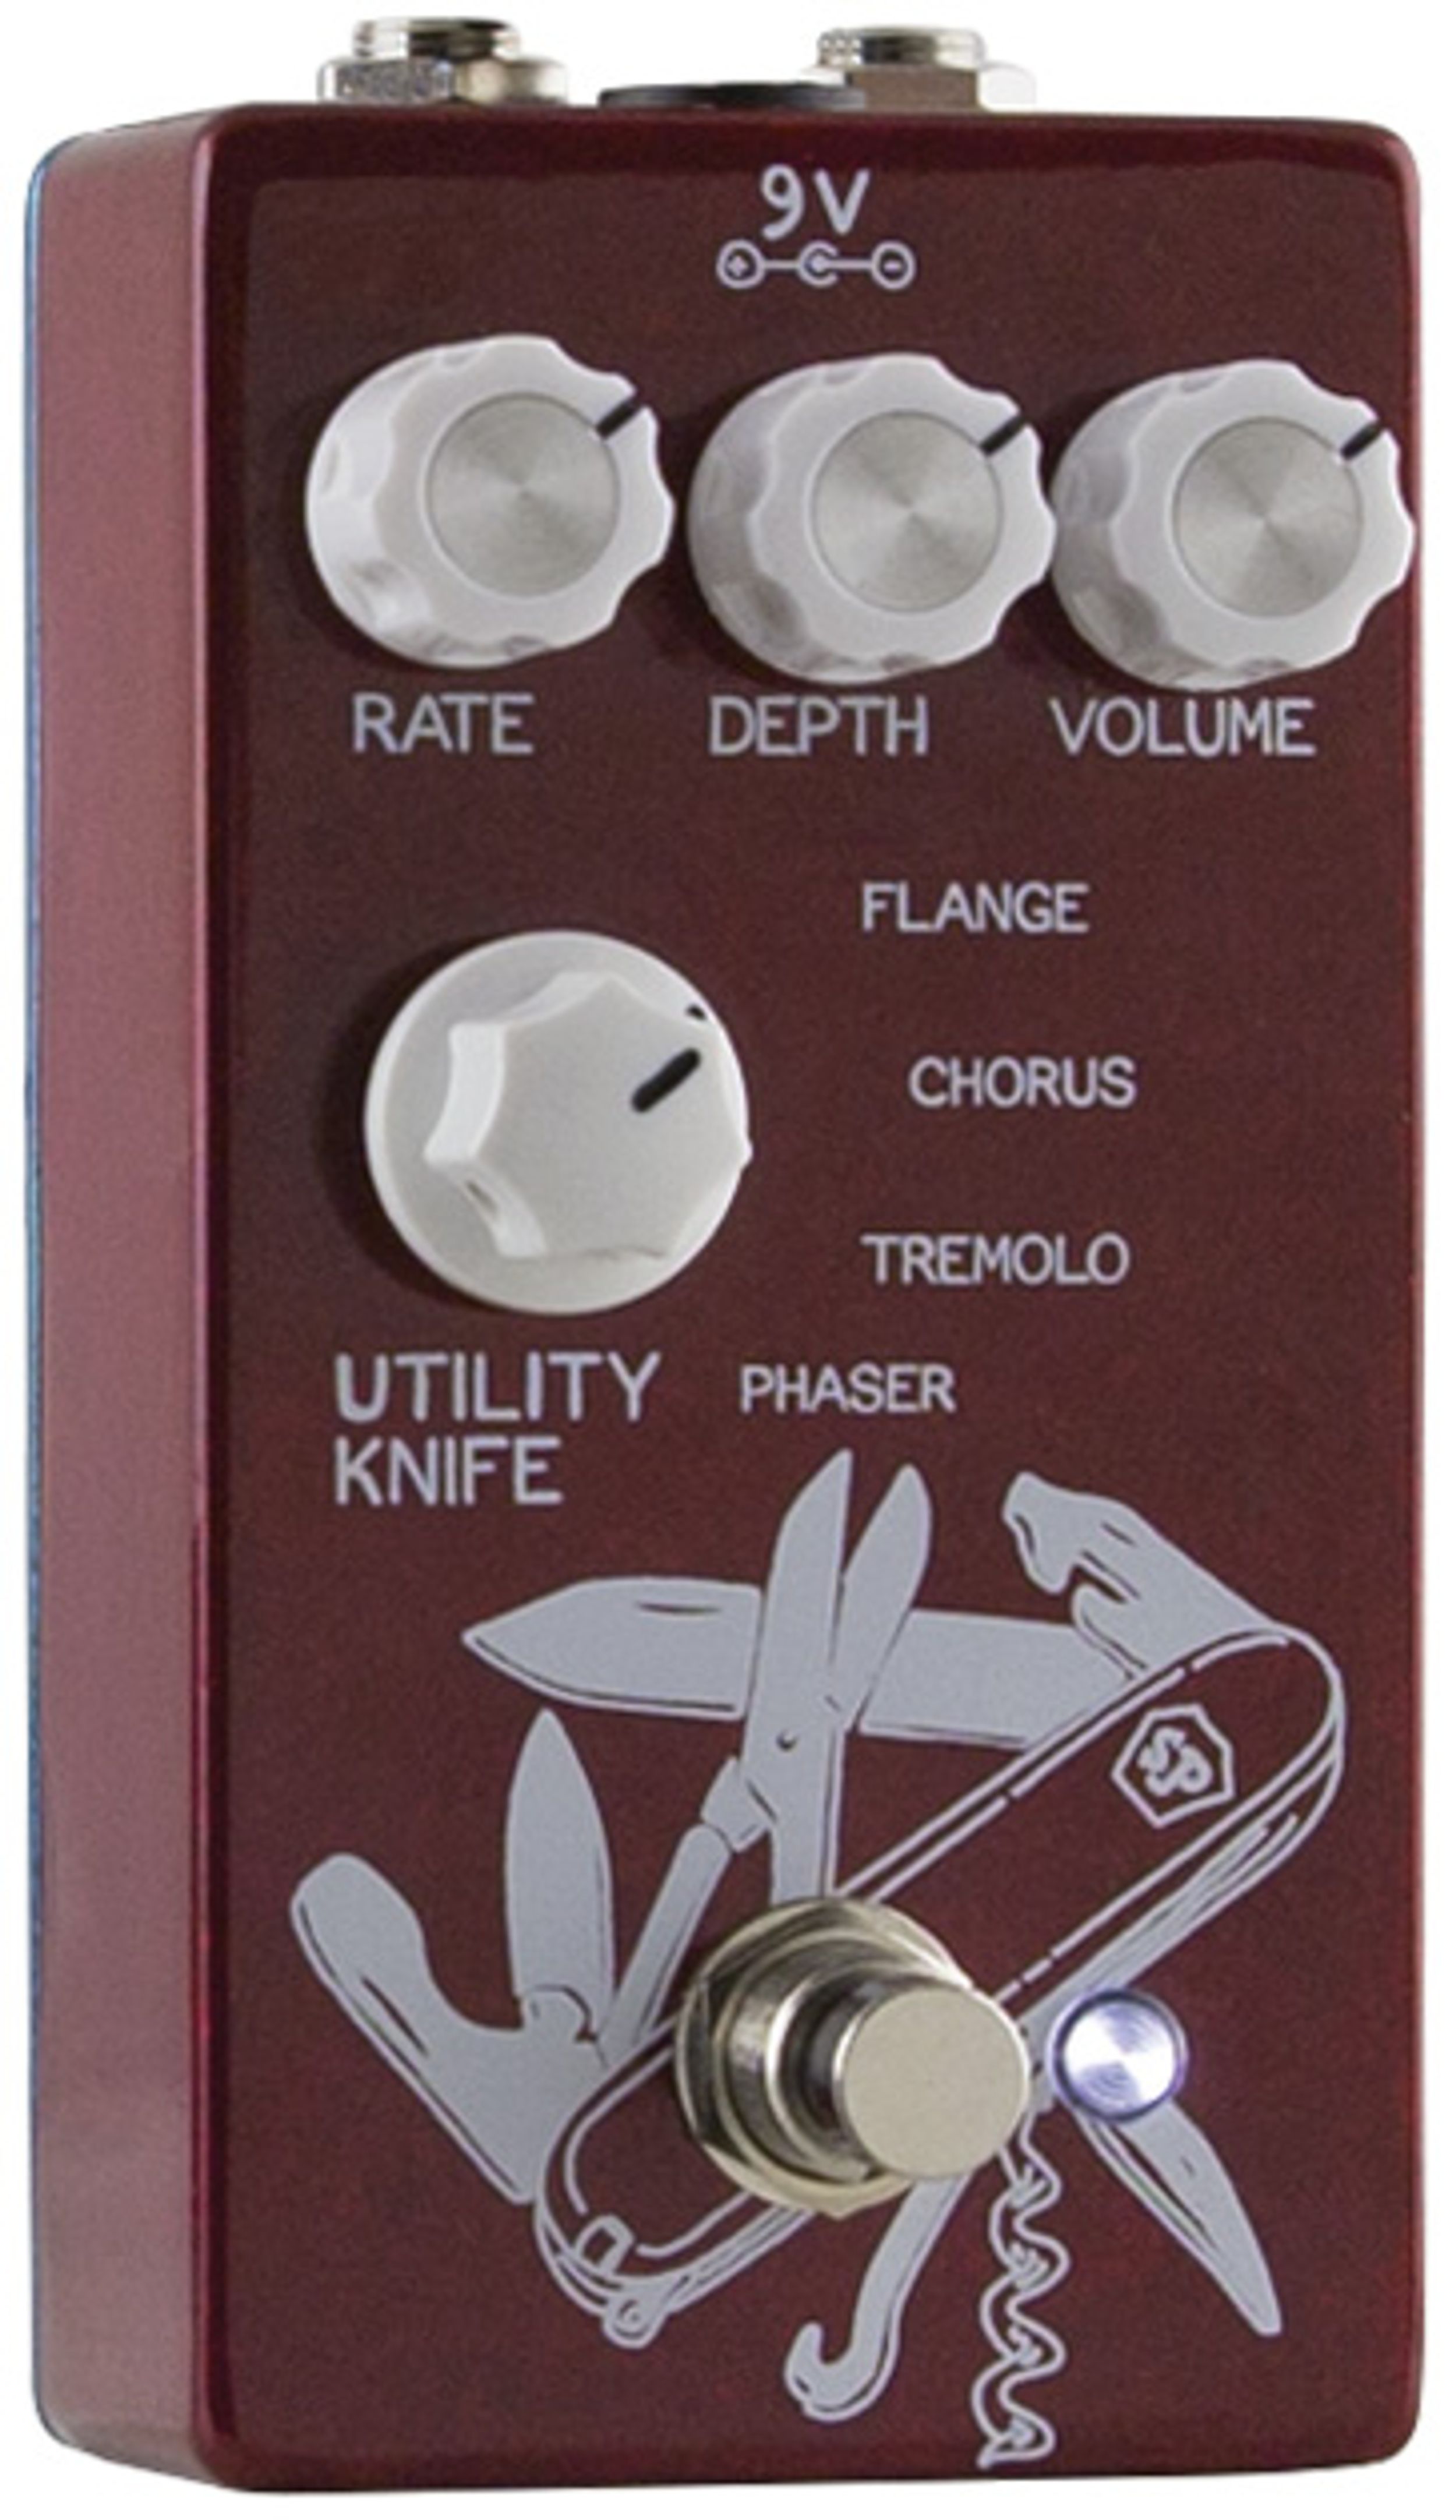 Southampton Pedals Utility Knife Review